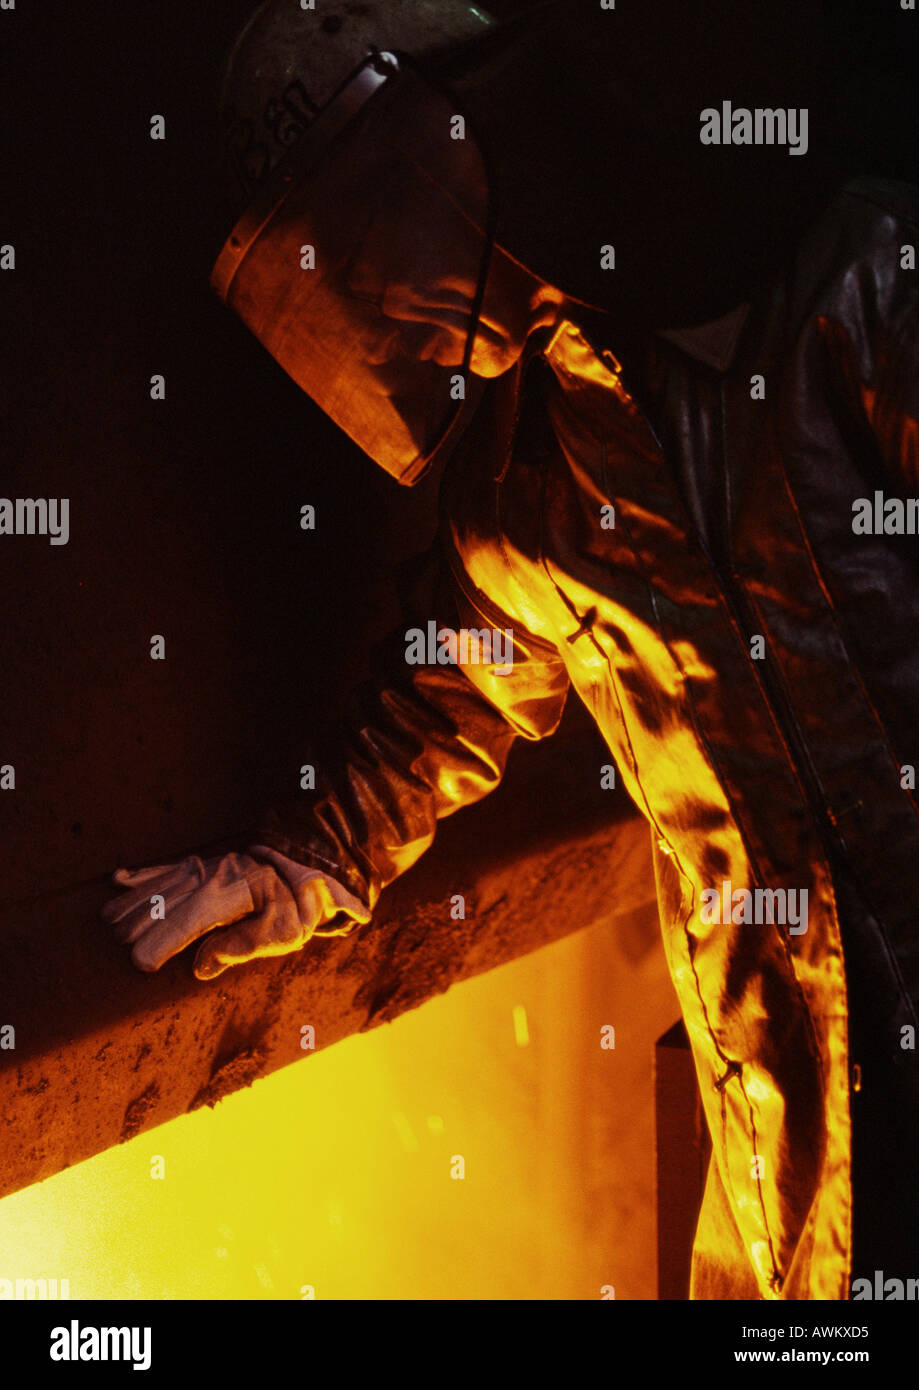 Man wearing protective suit and eyeshade Stock Photo